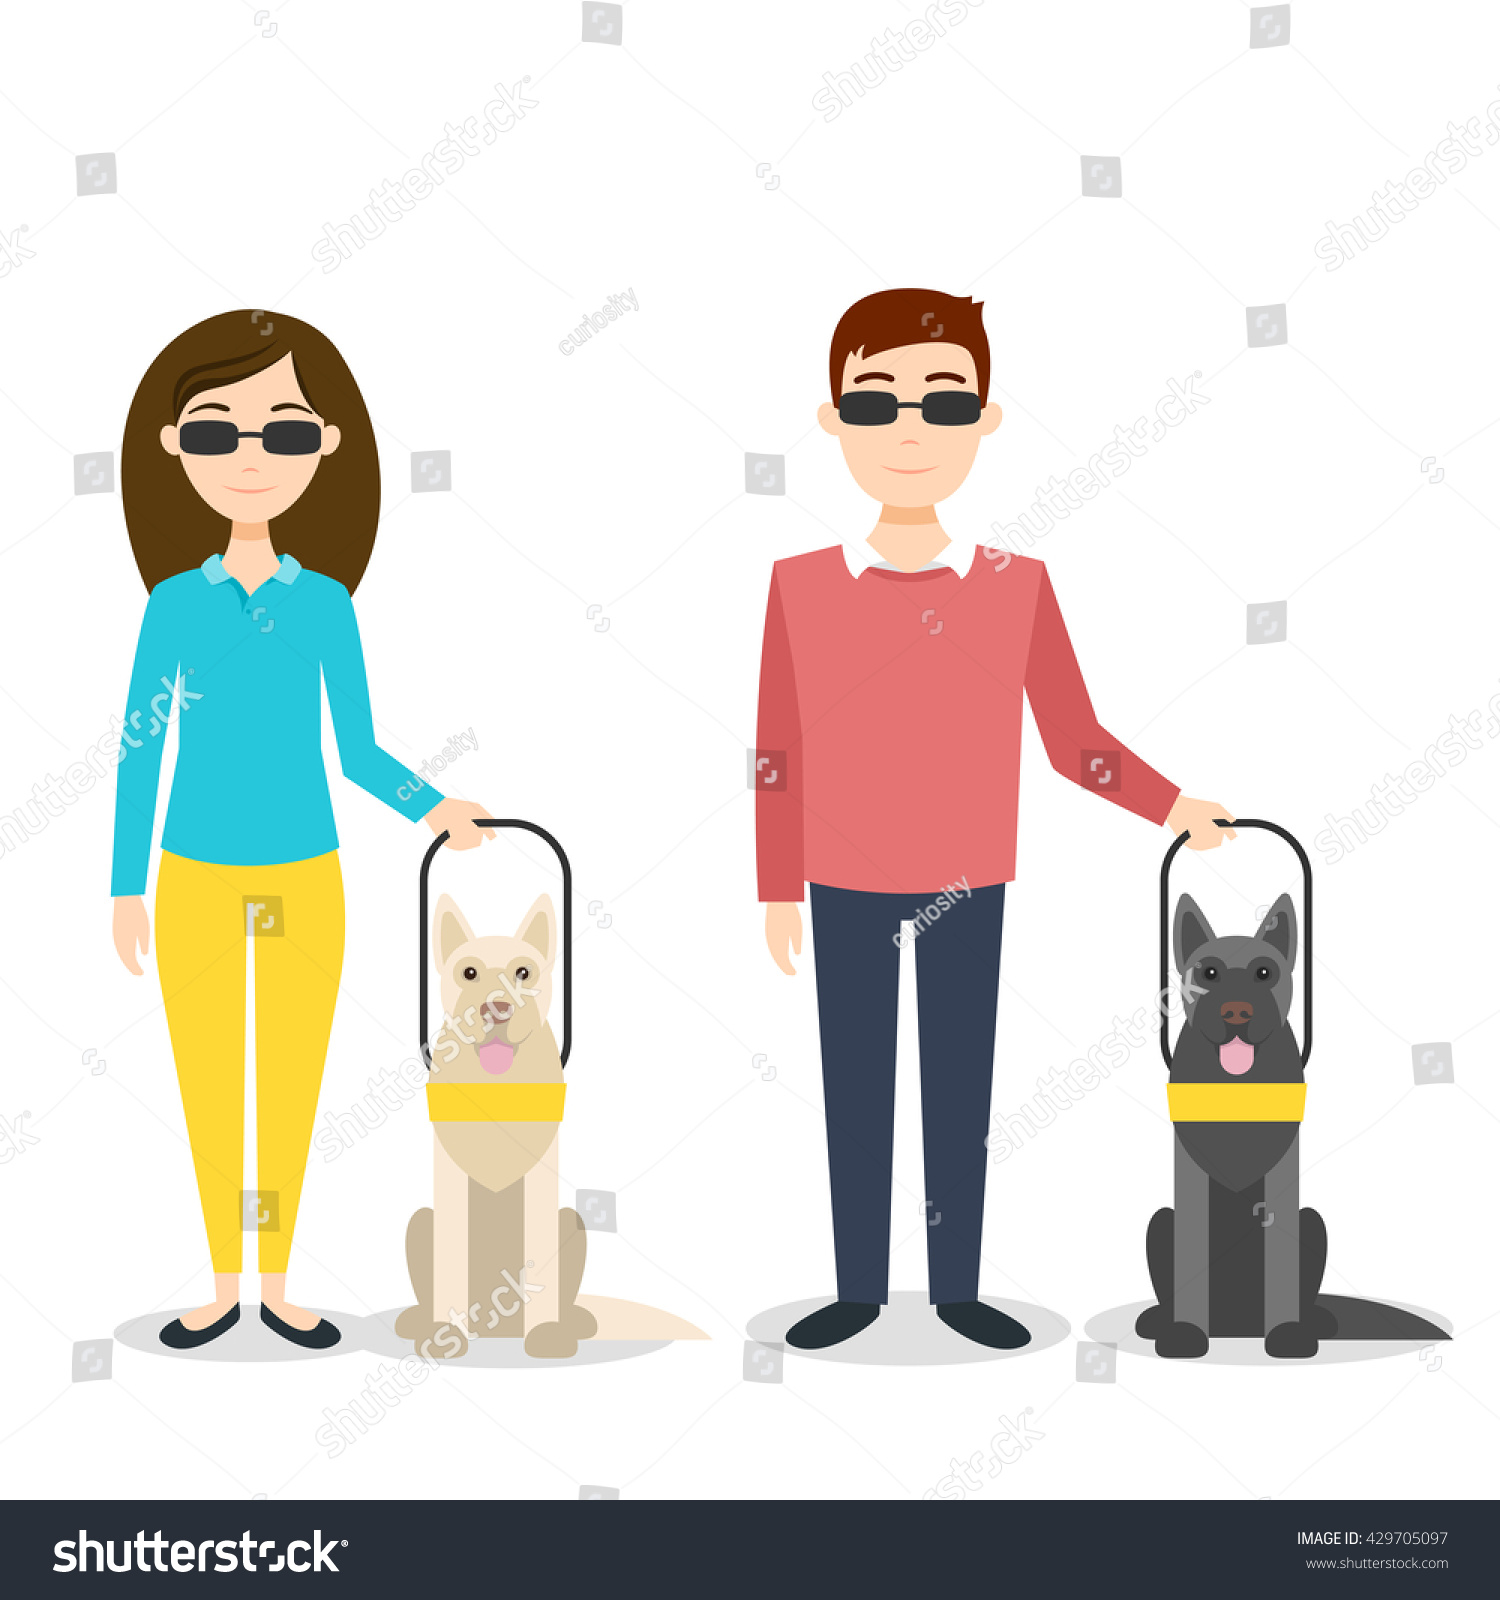 SVG of Vector illustration of blind person. Disabled man and woman with guide dogs. svg